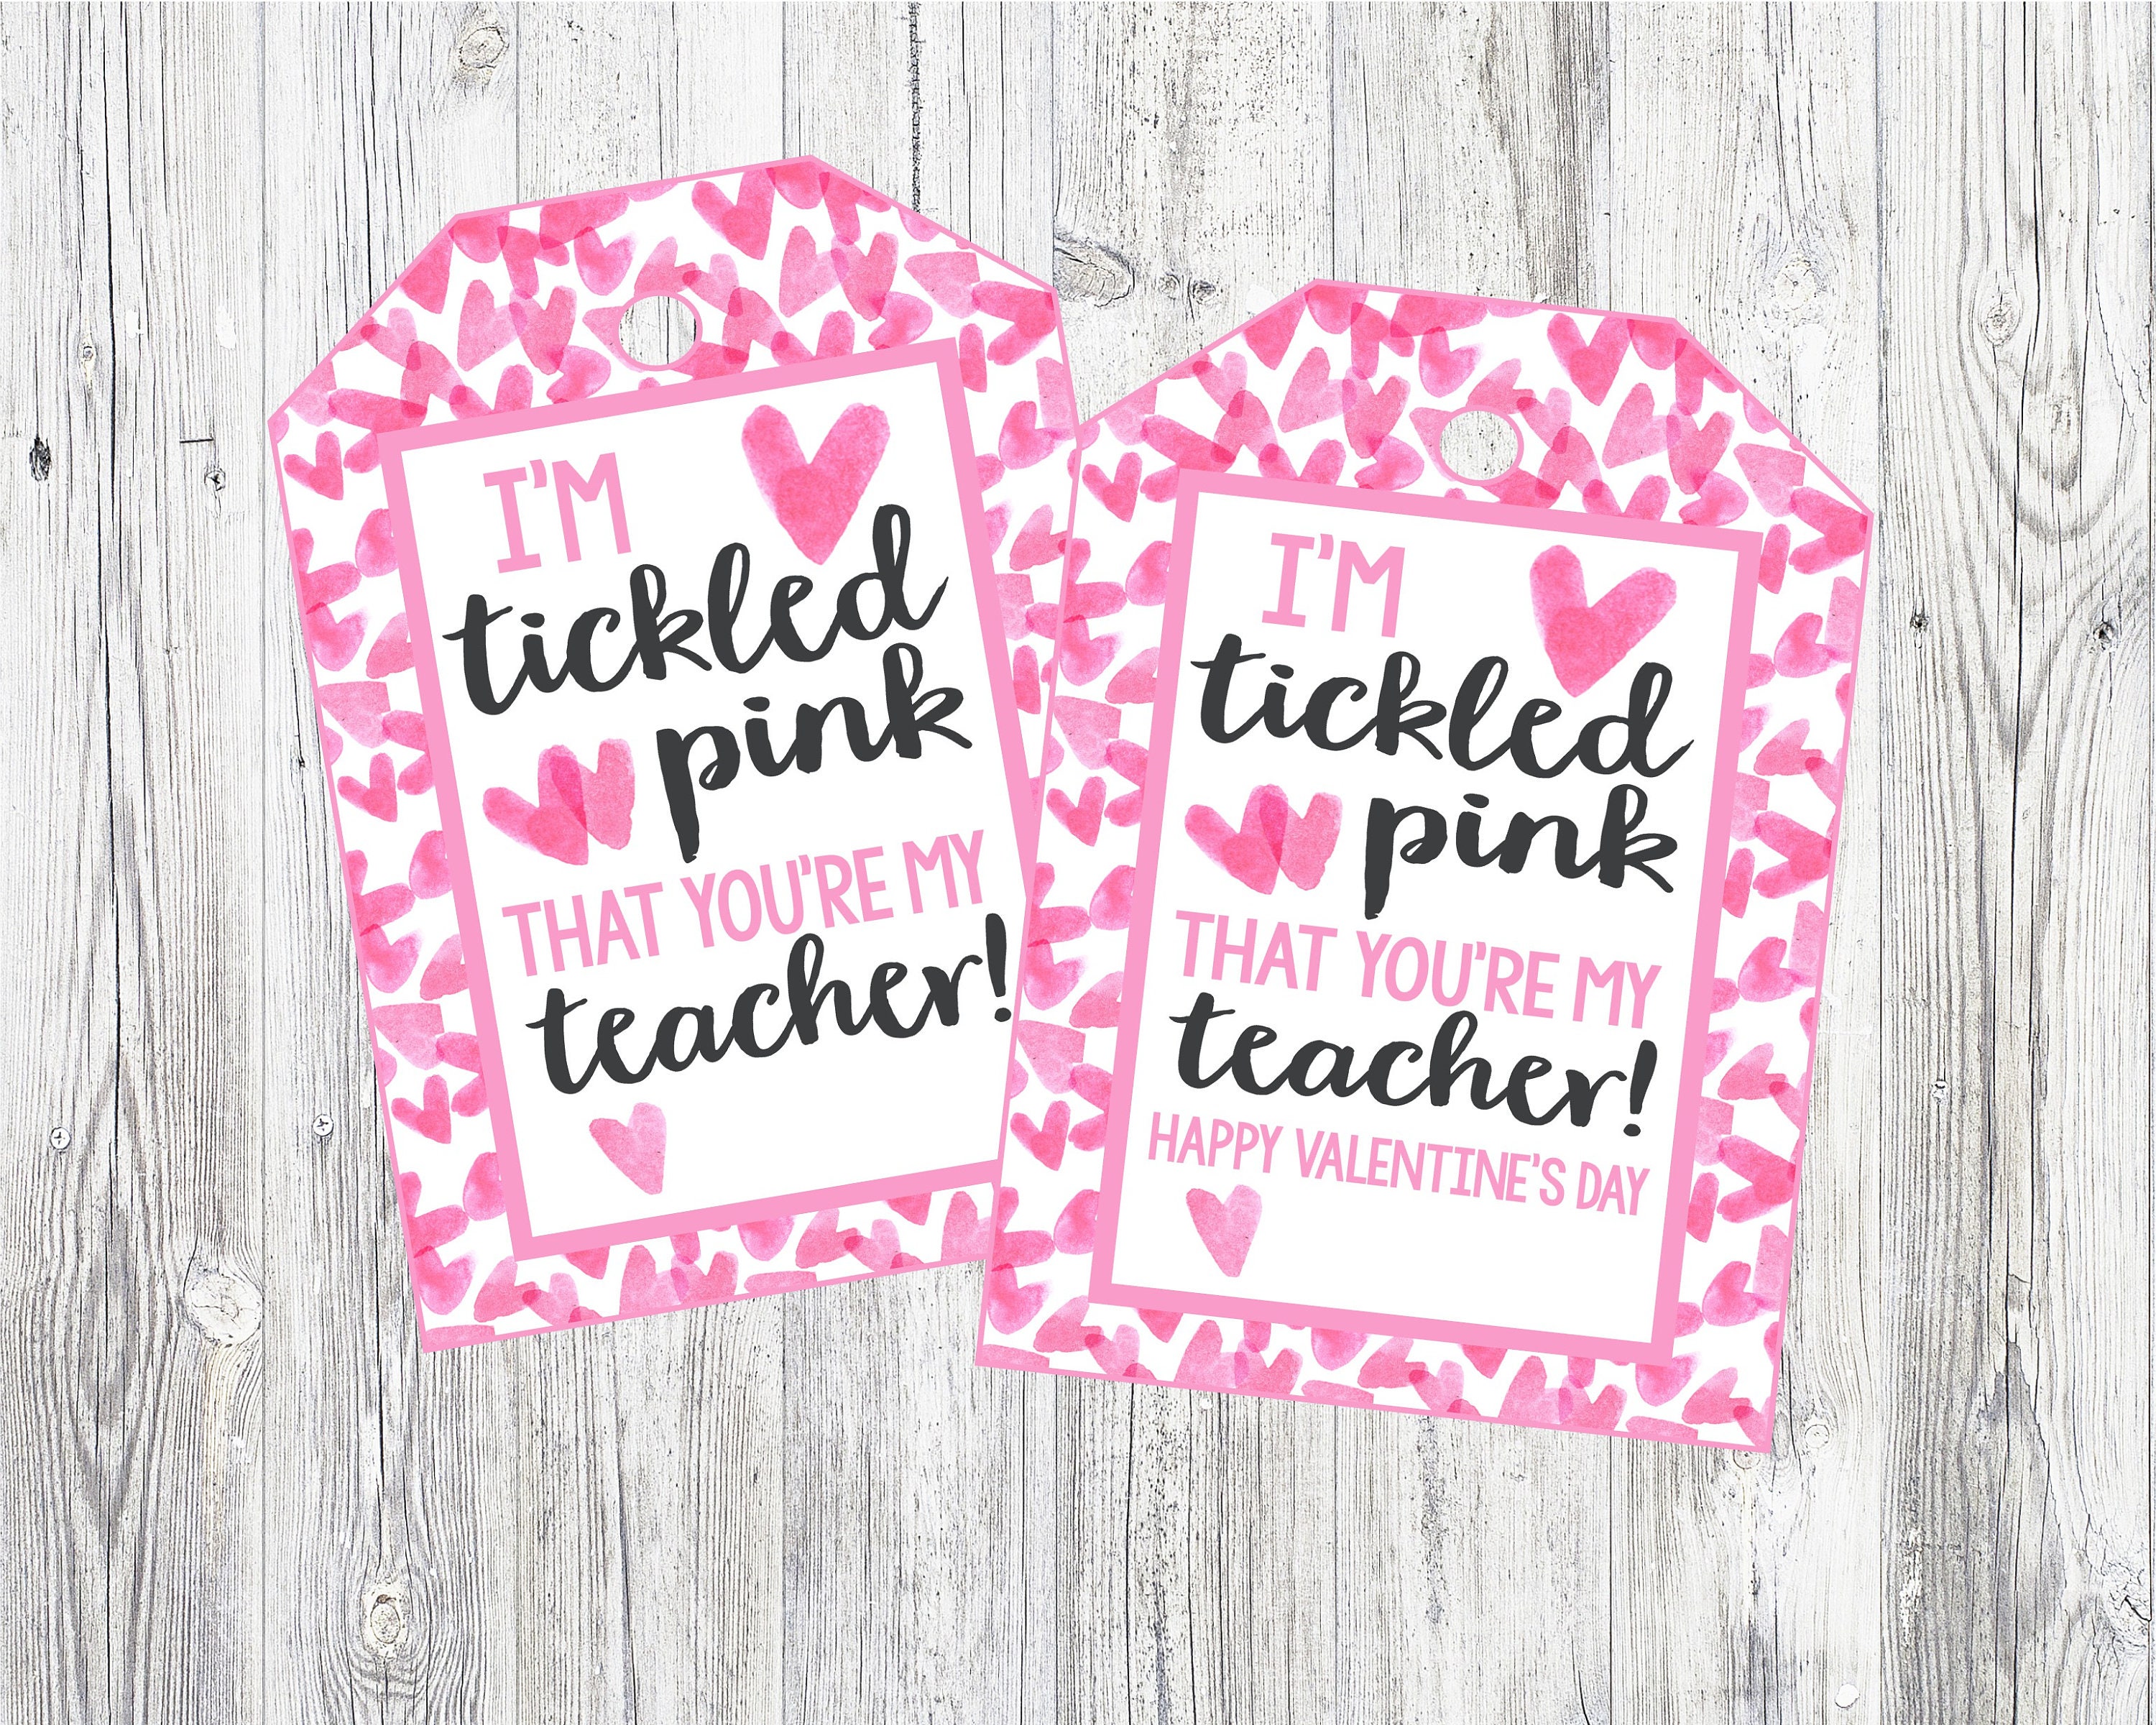 Tickled pink clips